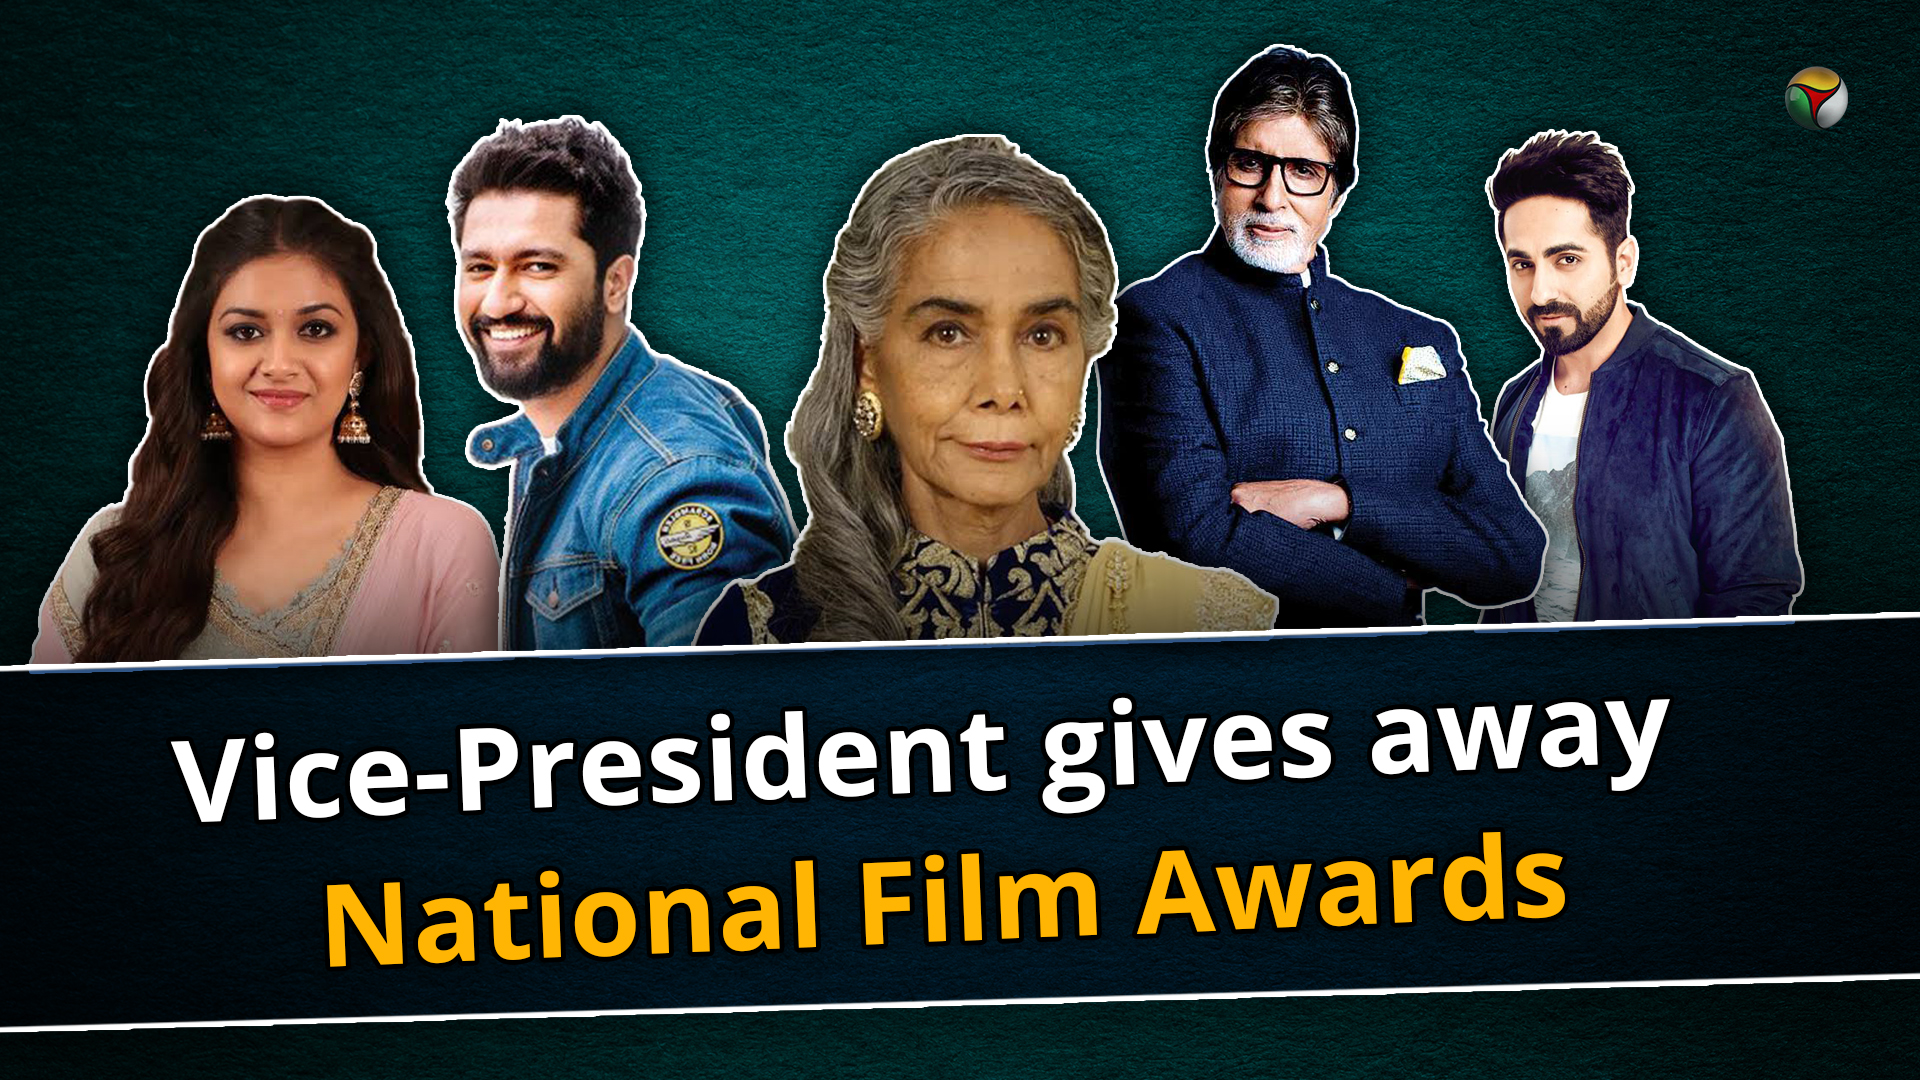 Vice-President gives away National Film Awards